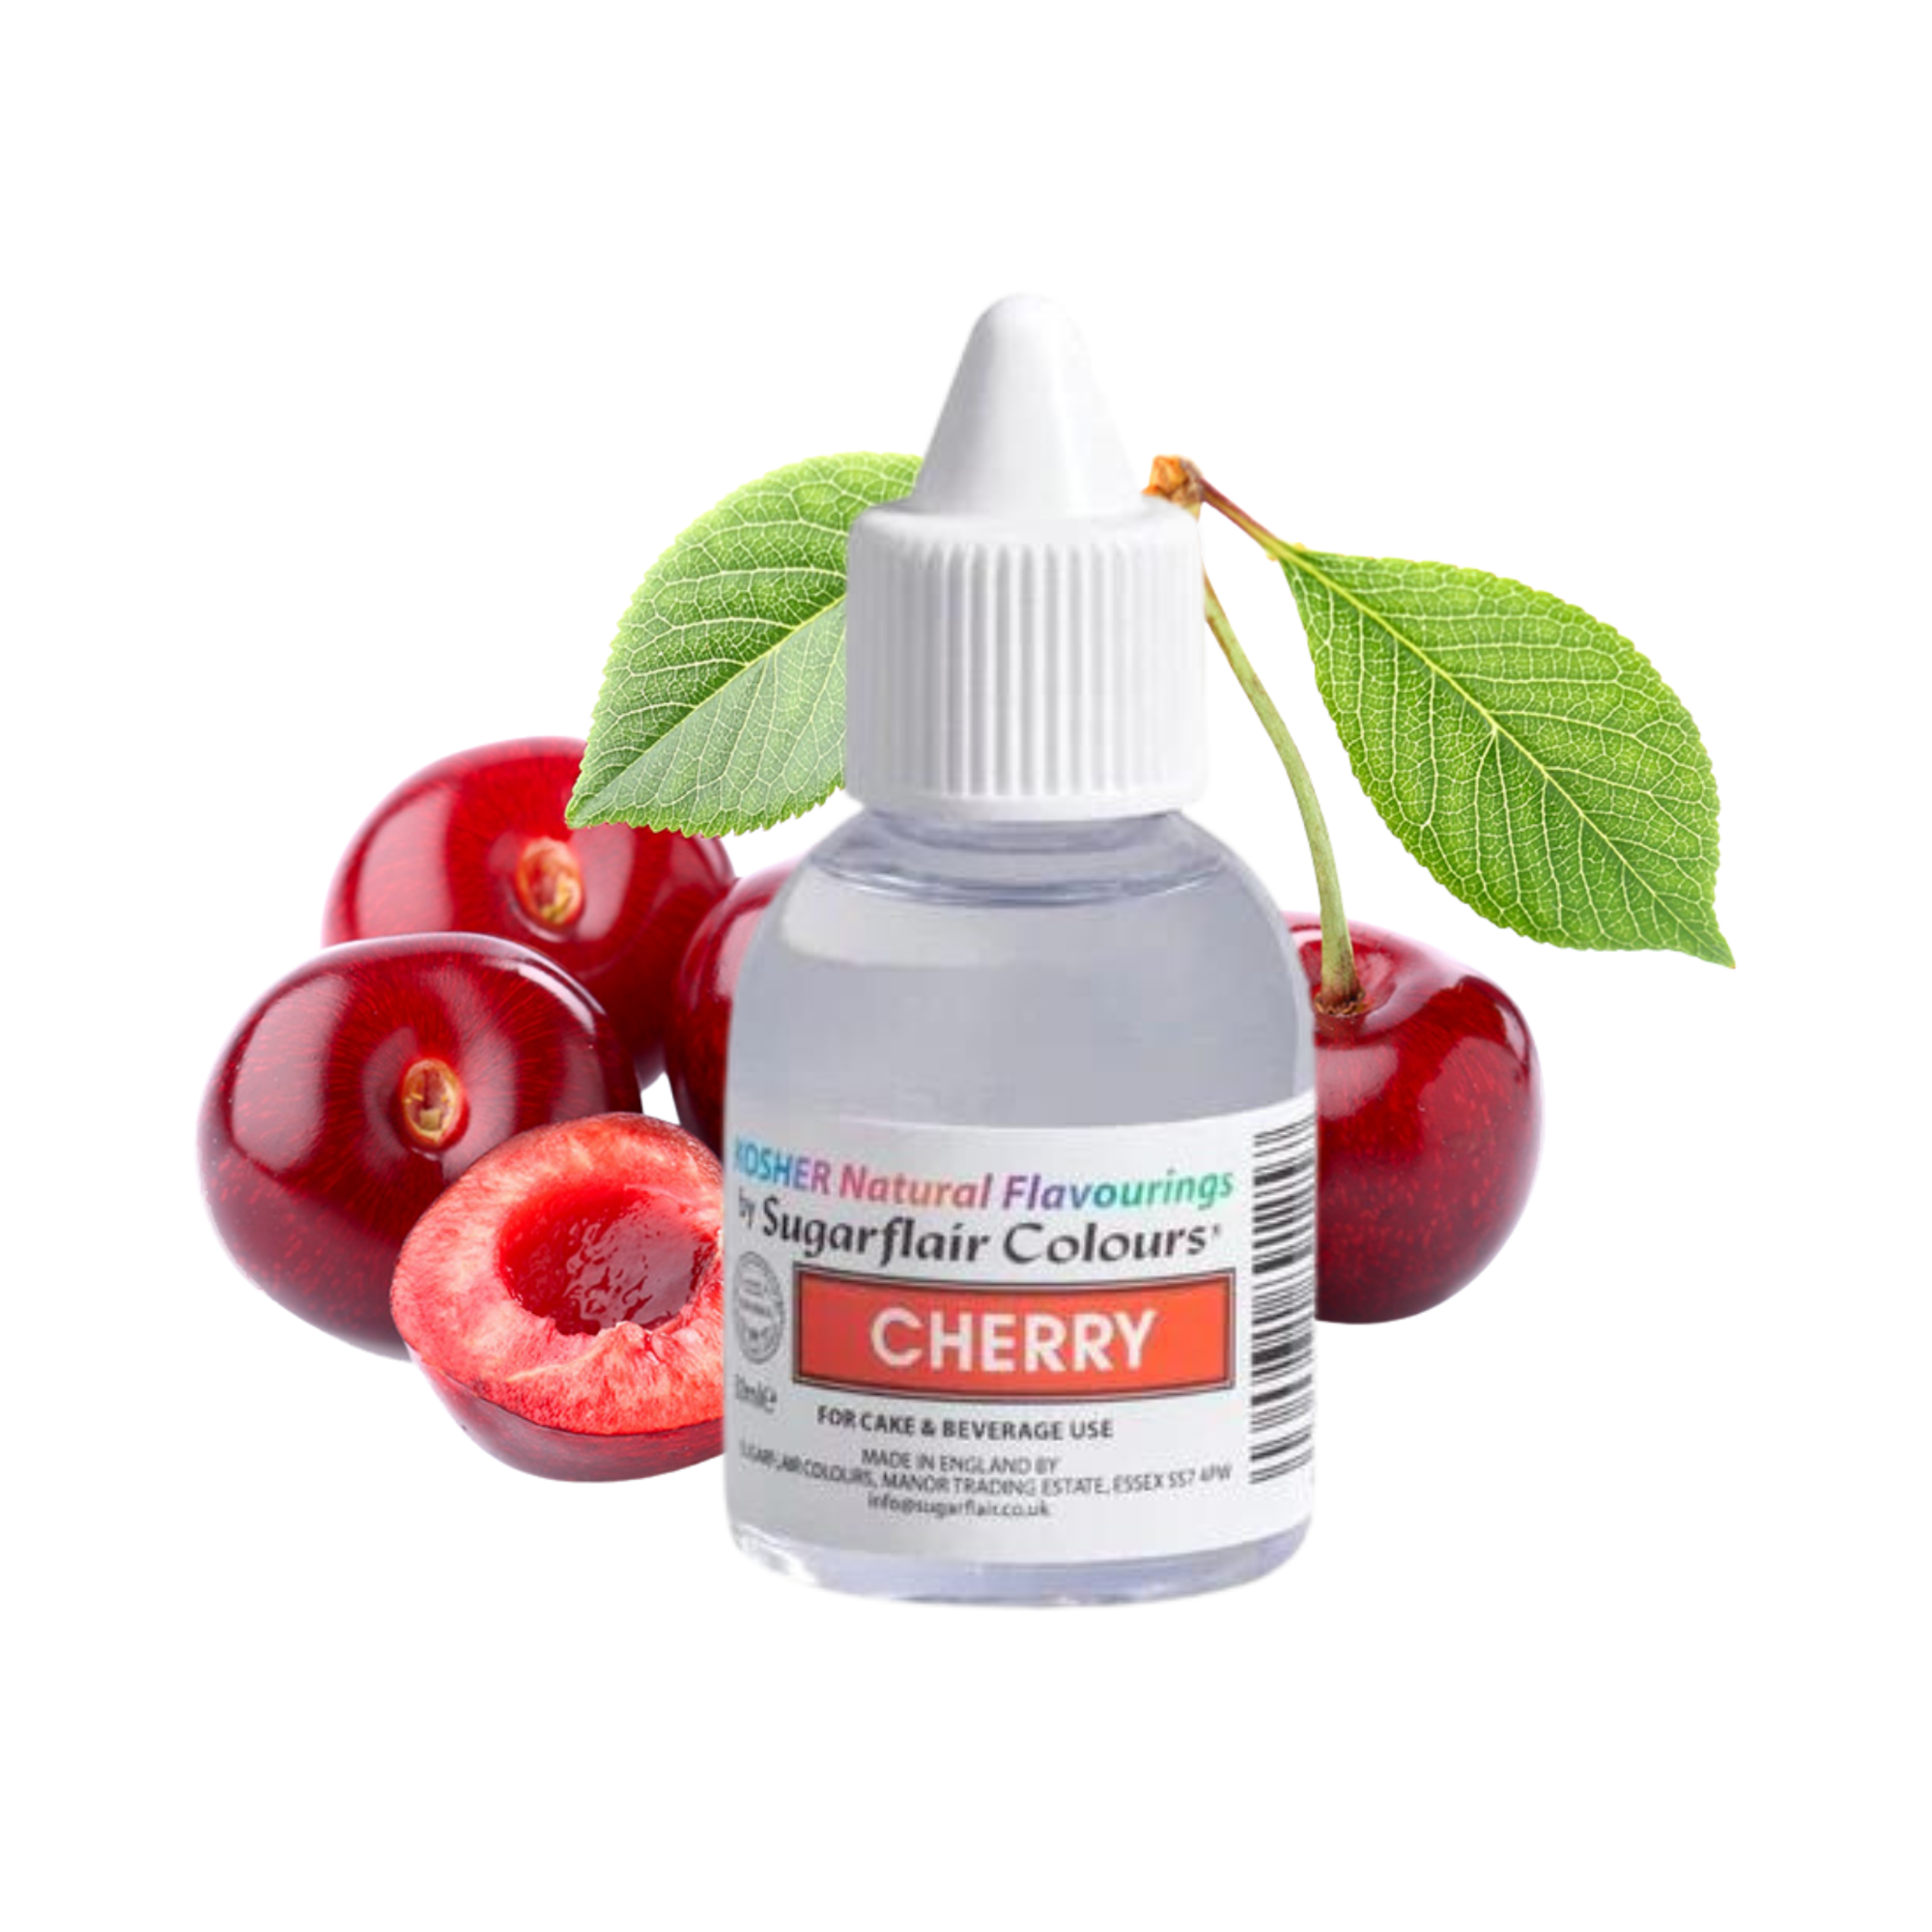 Sugarflair Cherry - Kosher Concentrated Natural Flavour / Food Flavouring 30ml